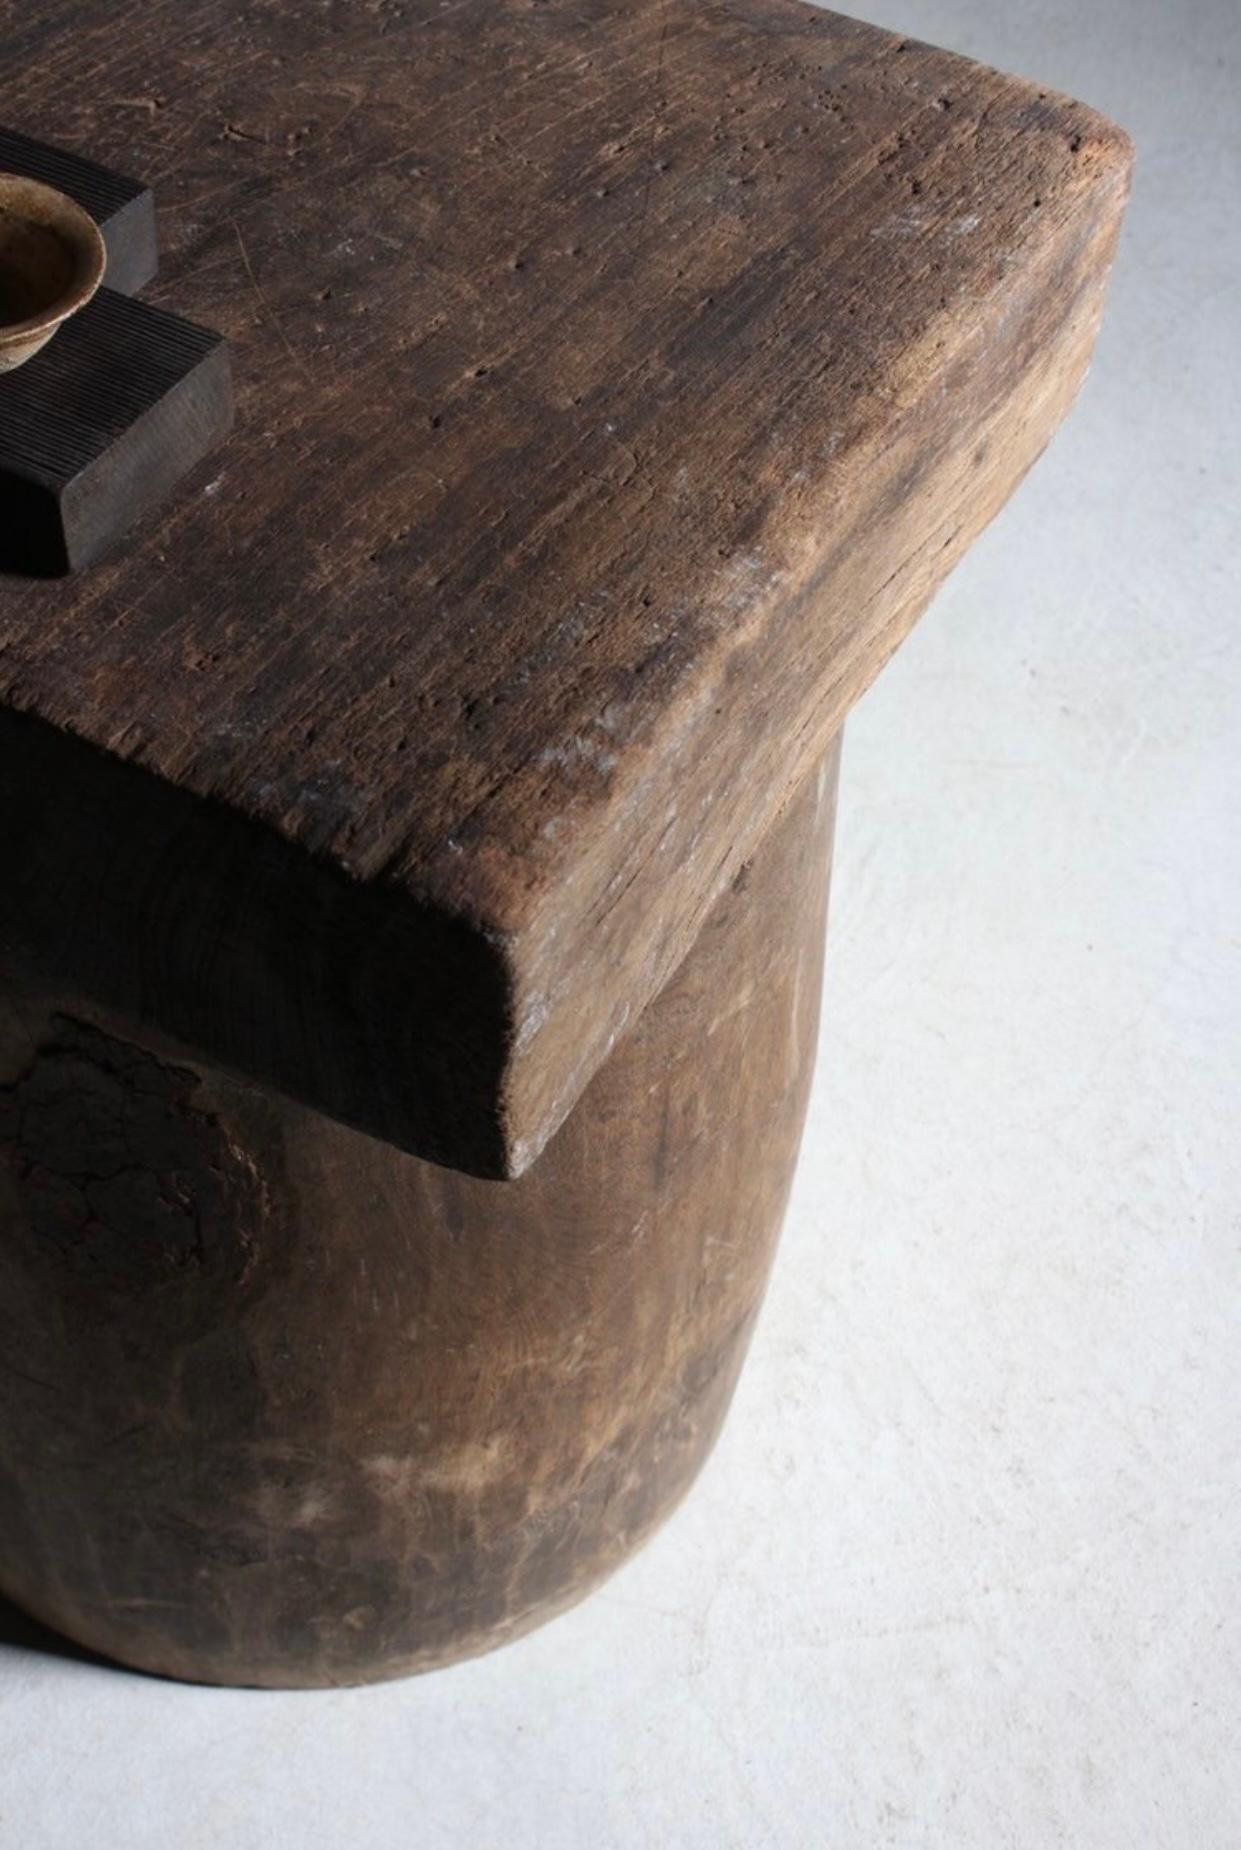 This rare rice grinder table comes in two pieces; top and the body. It was carved from solid organic wood with its natural wound and texture which is unachievable using standard stains. Could be used both separately and together, as in either way